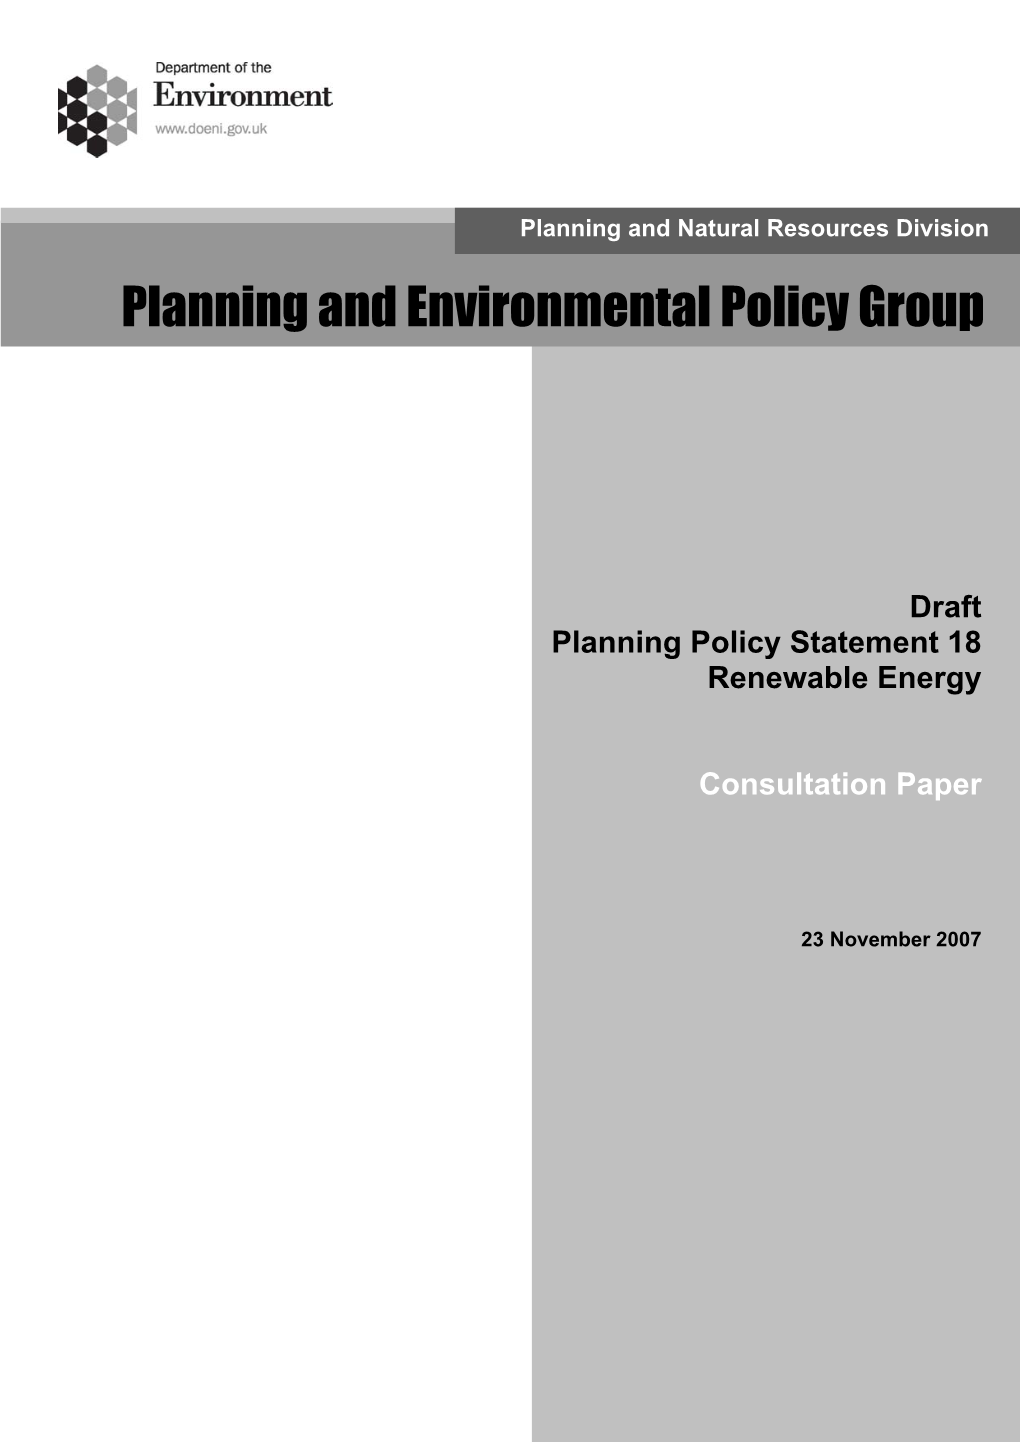 Draft Planning Policy Statement 18 Renewable Energy Public Consultation Draft